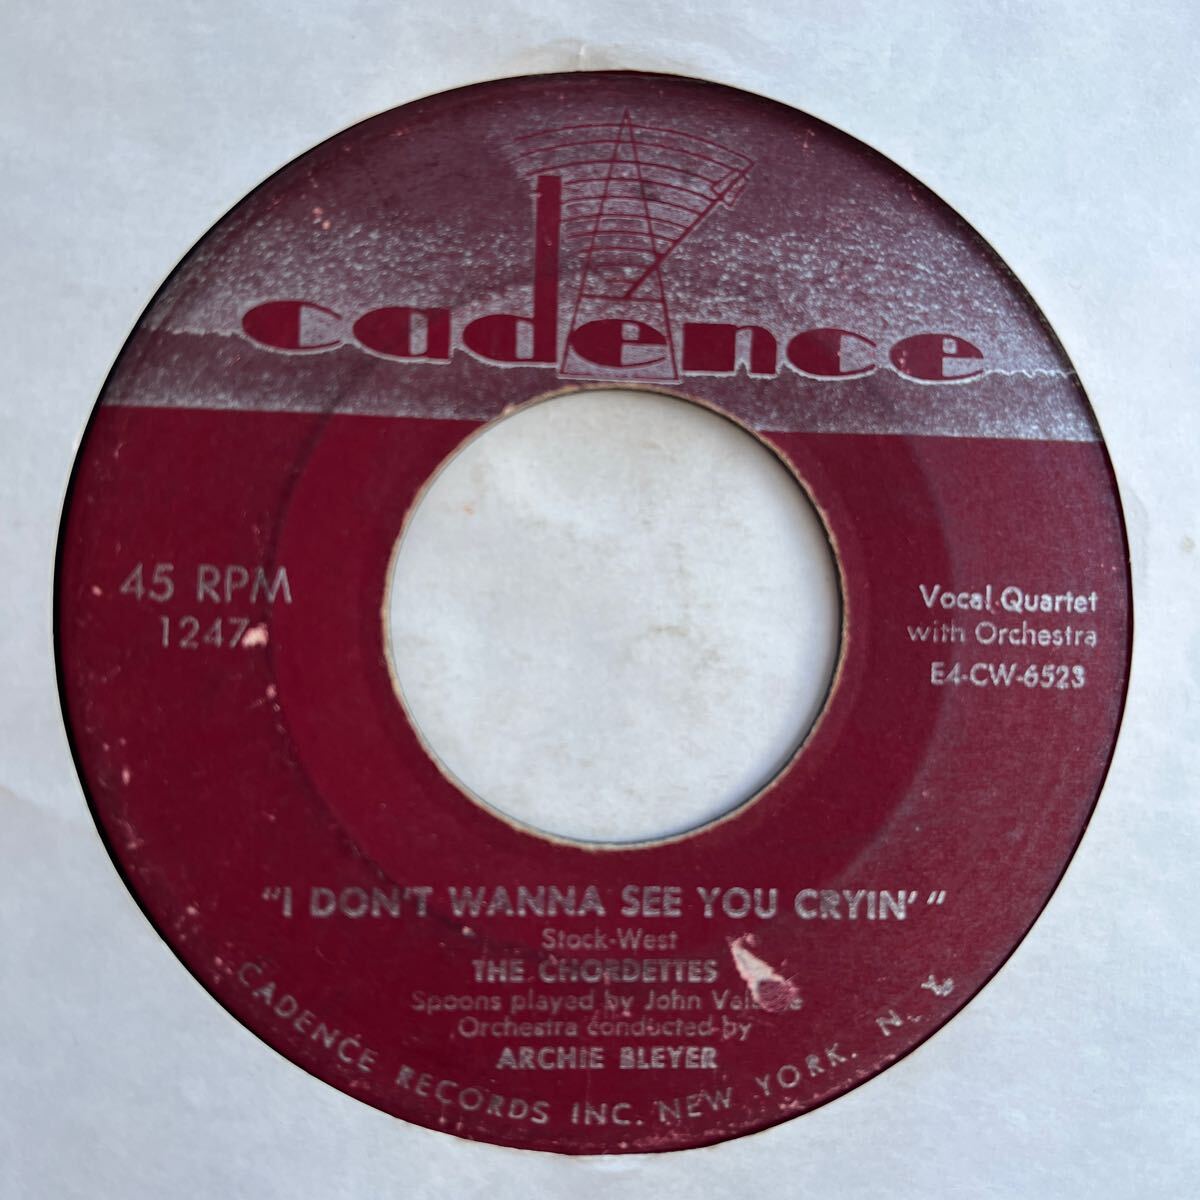 US盤 / 7 / 1954 / THE CHORDETTES # MR. SANDMAN / I DON'T WANNA SEE YOU CRYIN'_画像2